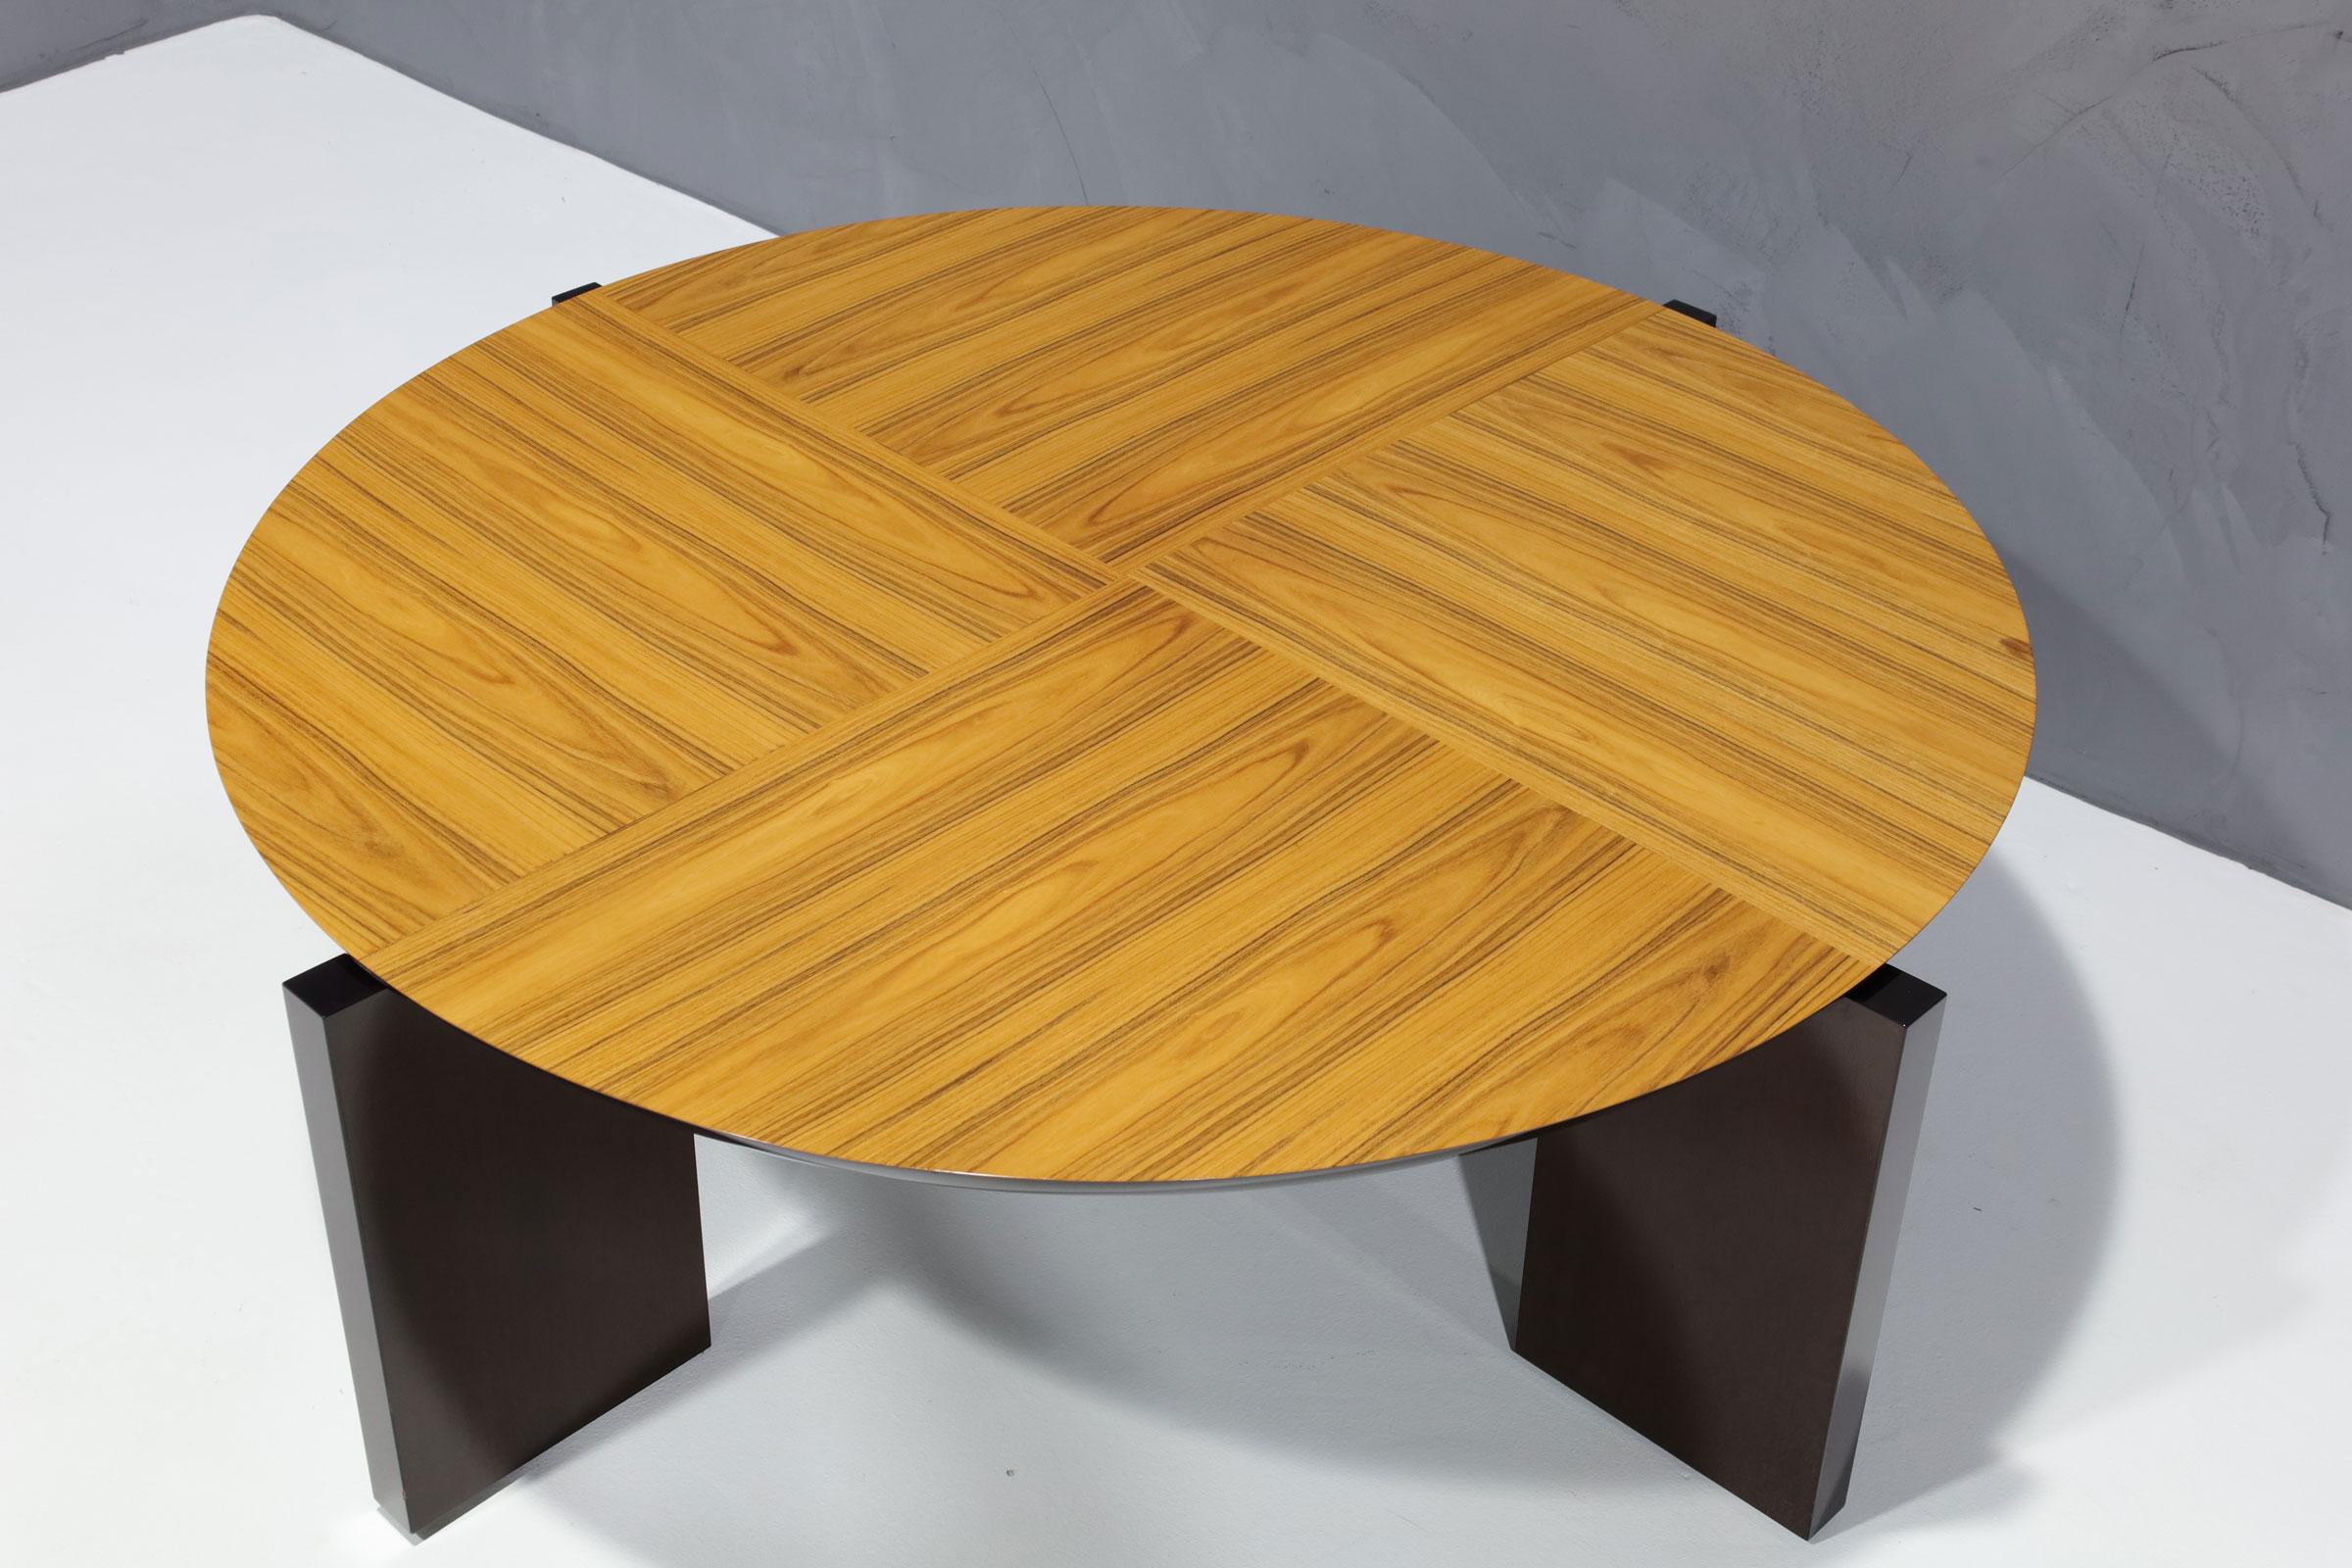 The Olympia cocktail table is as much sculpture as it is designer furniture. The Ash book-matched veneer modern table top is made only of the highest quality materials by Wendell Castle's top craftspeople.

Fiberglass, fully lacquered with a